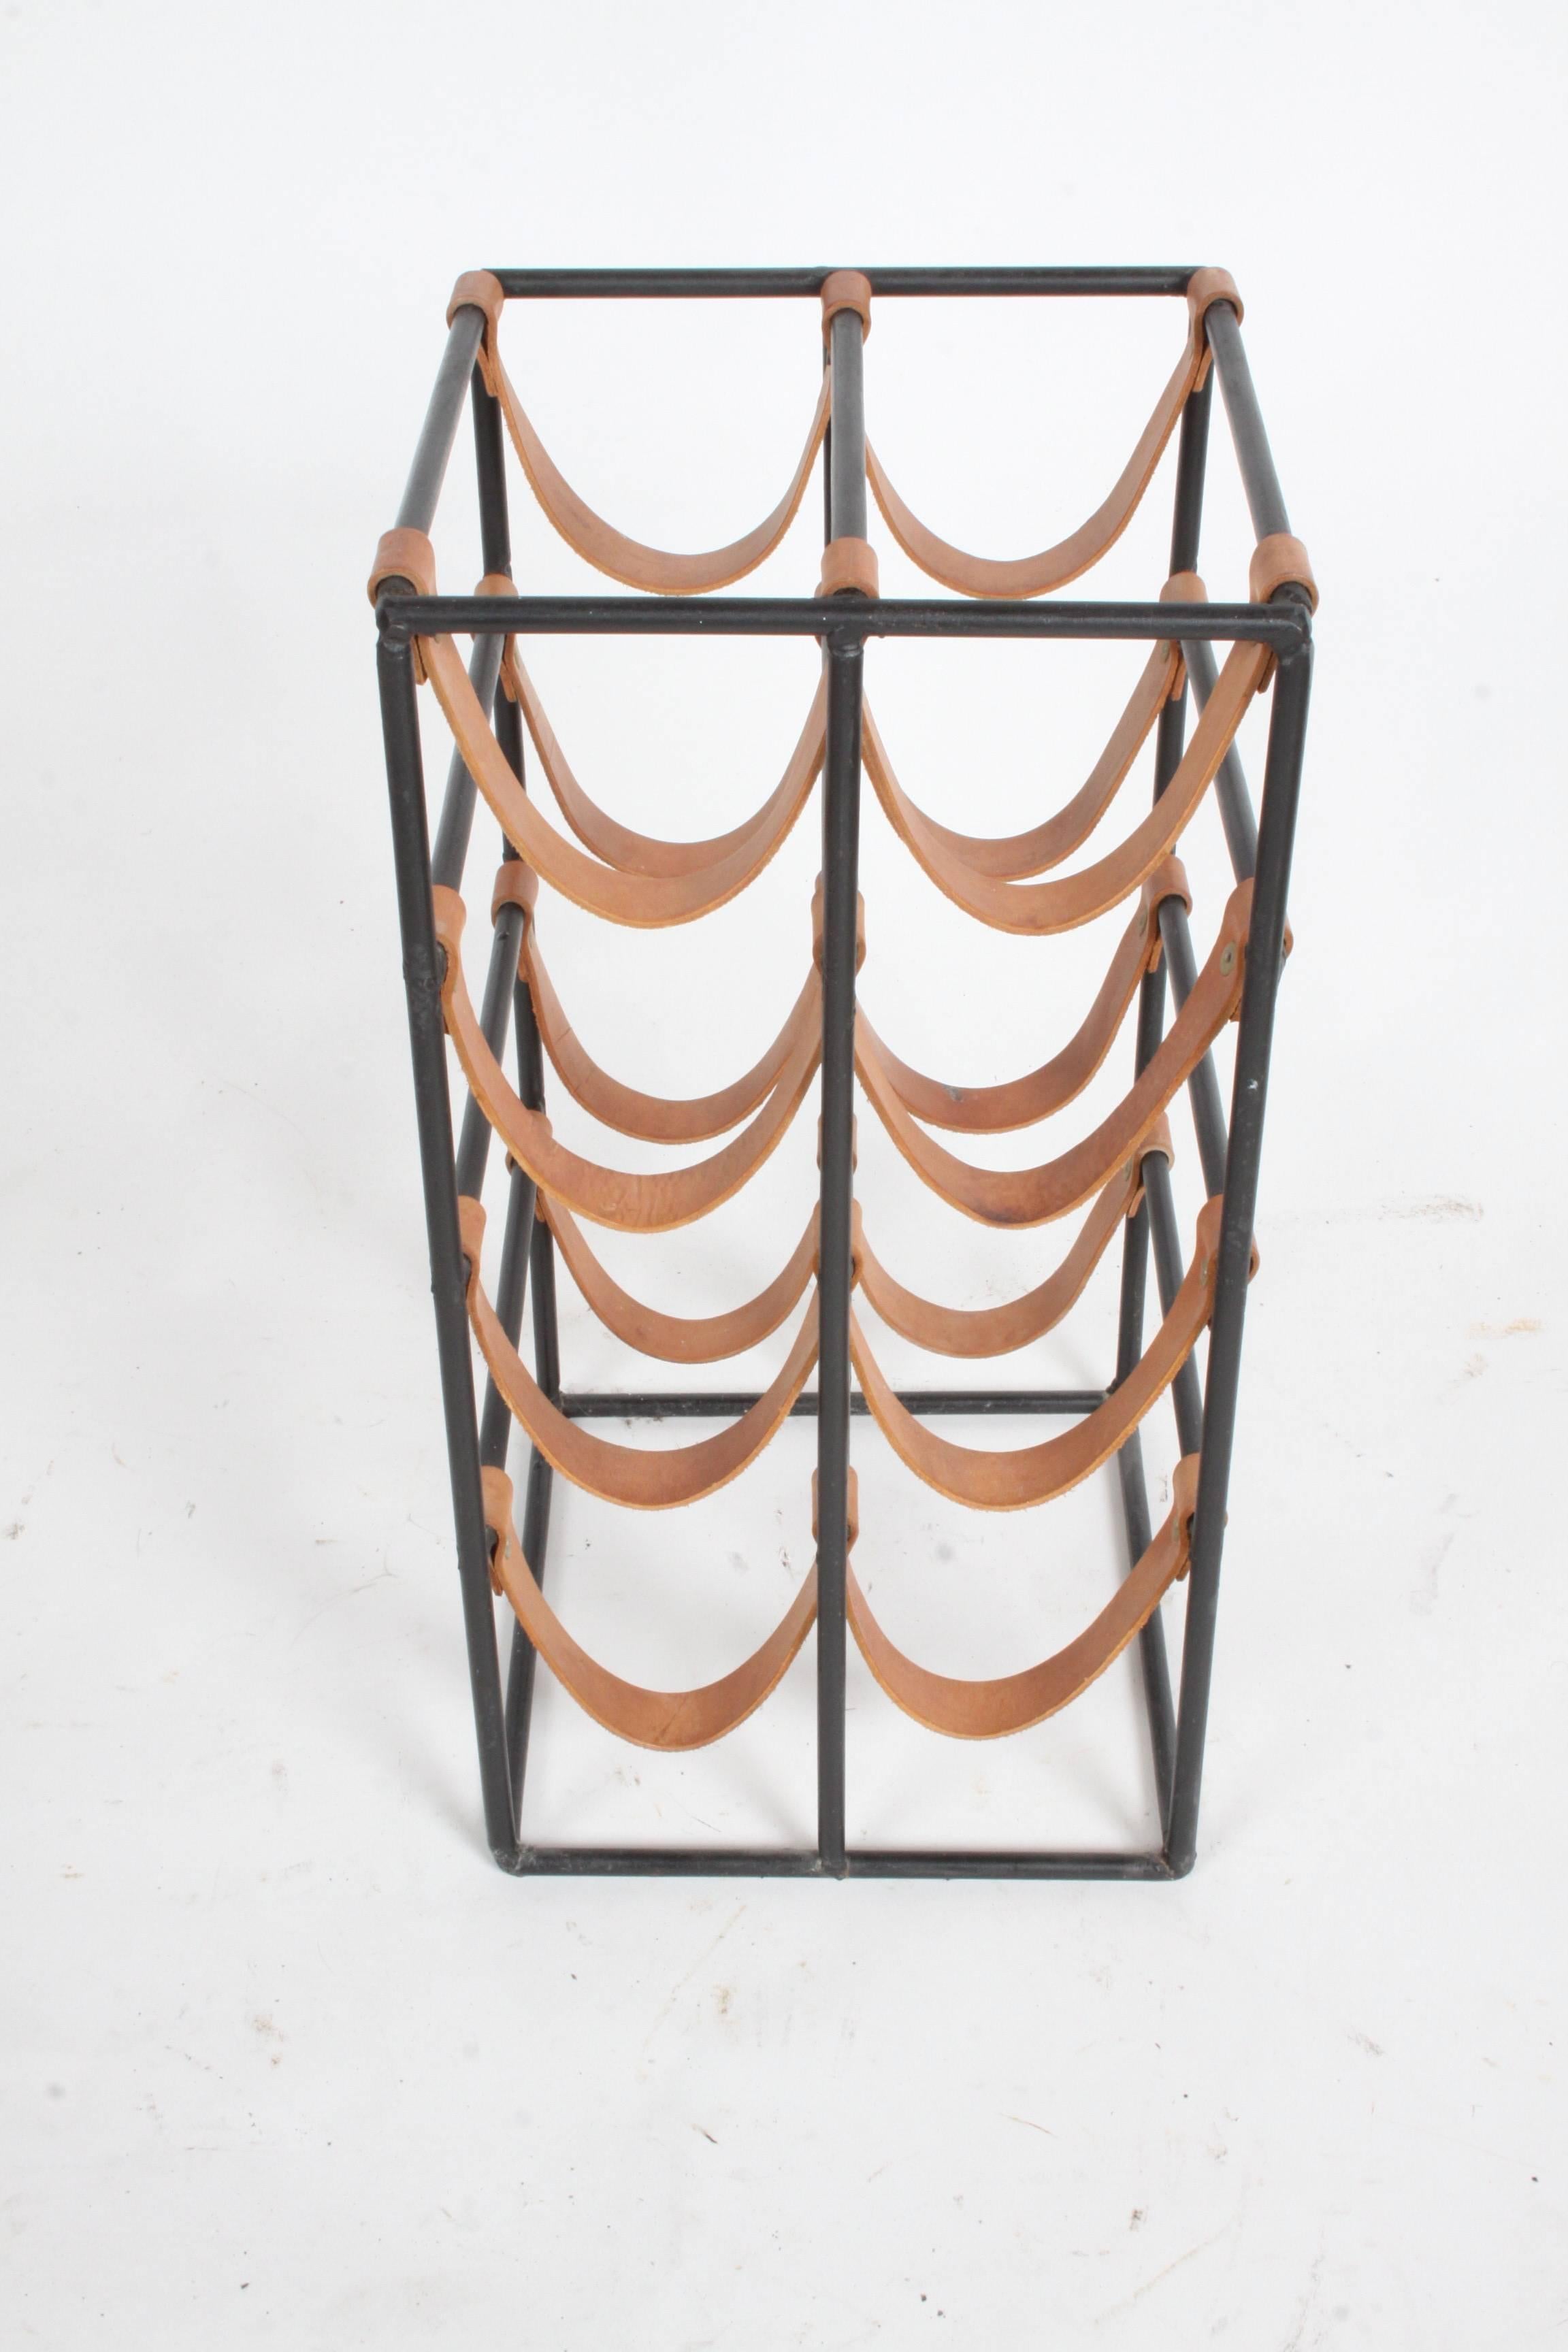 Arthur Umanoff for Shaver Howard 1950s iron and leather strap wine rack. Leather straps are solid, but may have a few old wine stains.